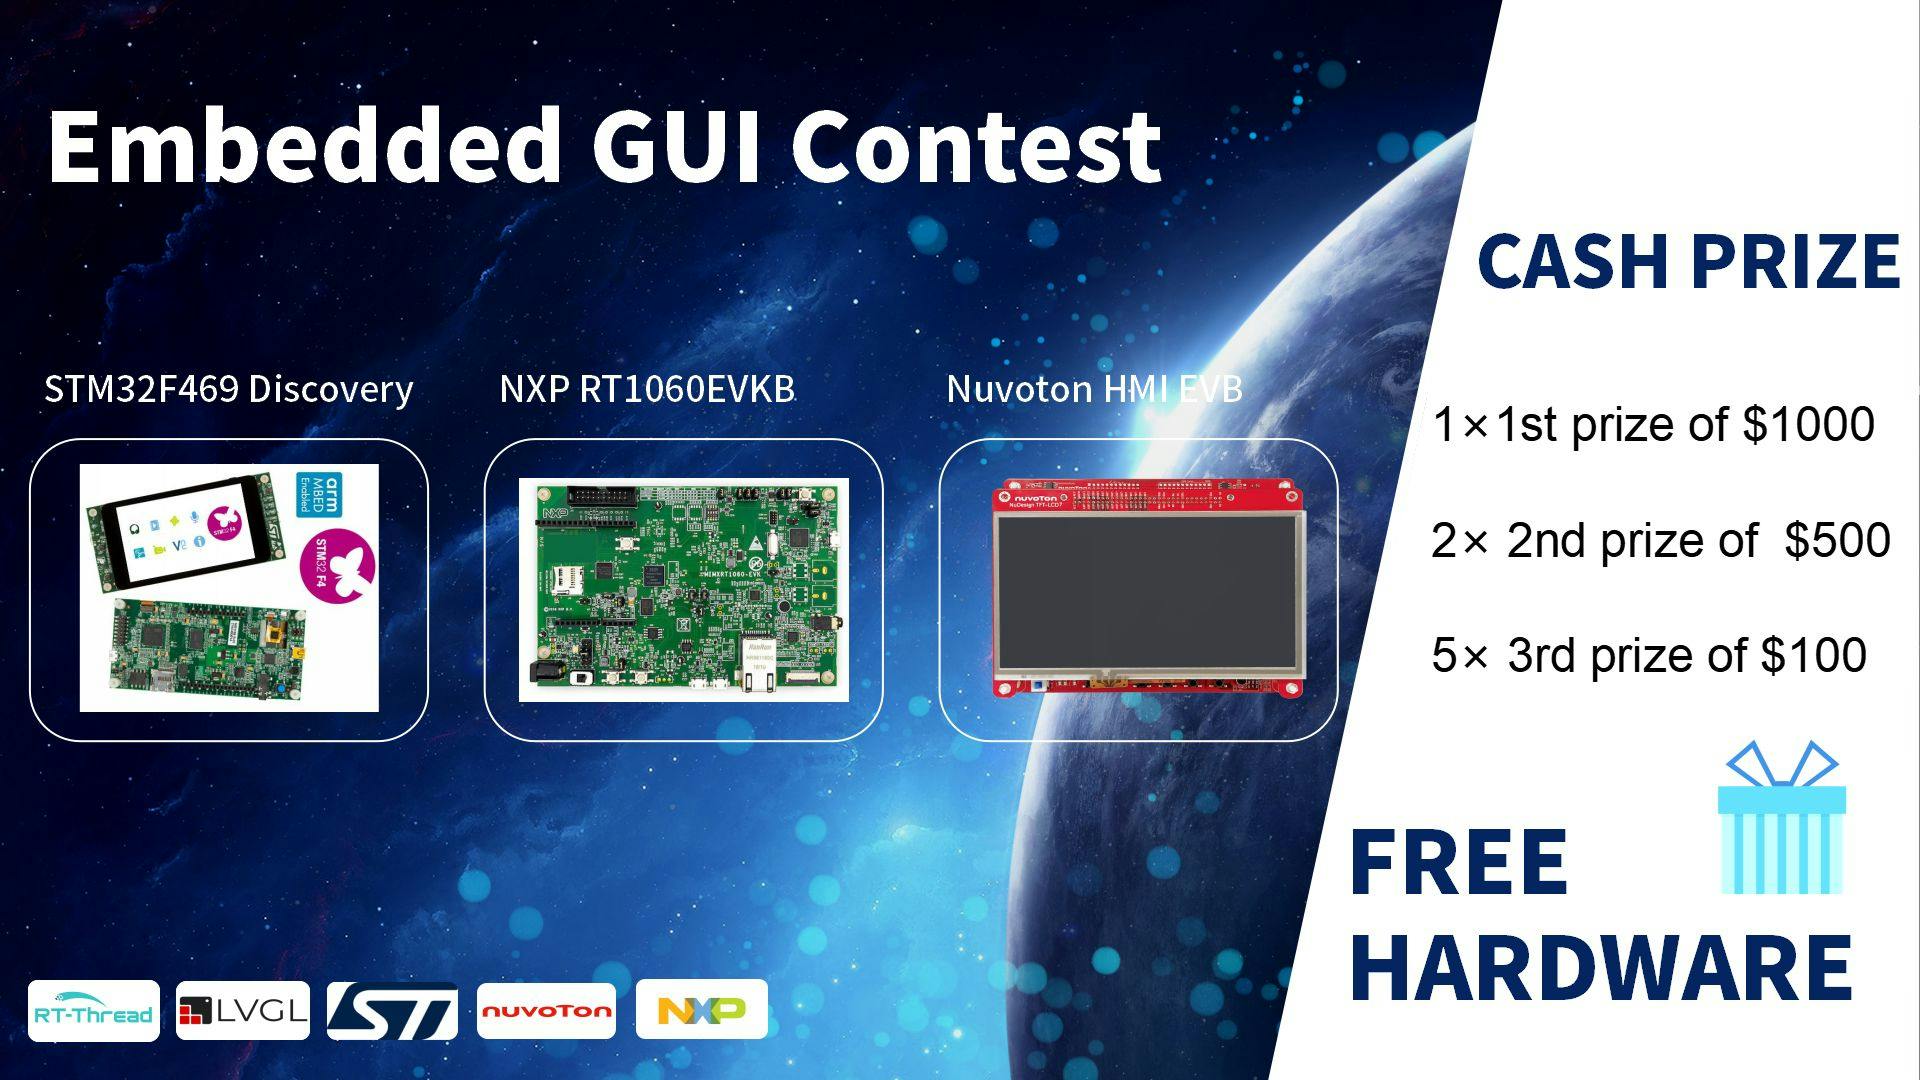 featured image - Introducing the Embedded GUI Contest